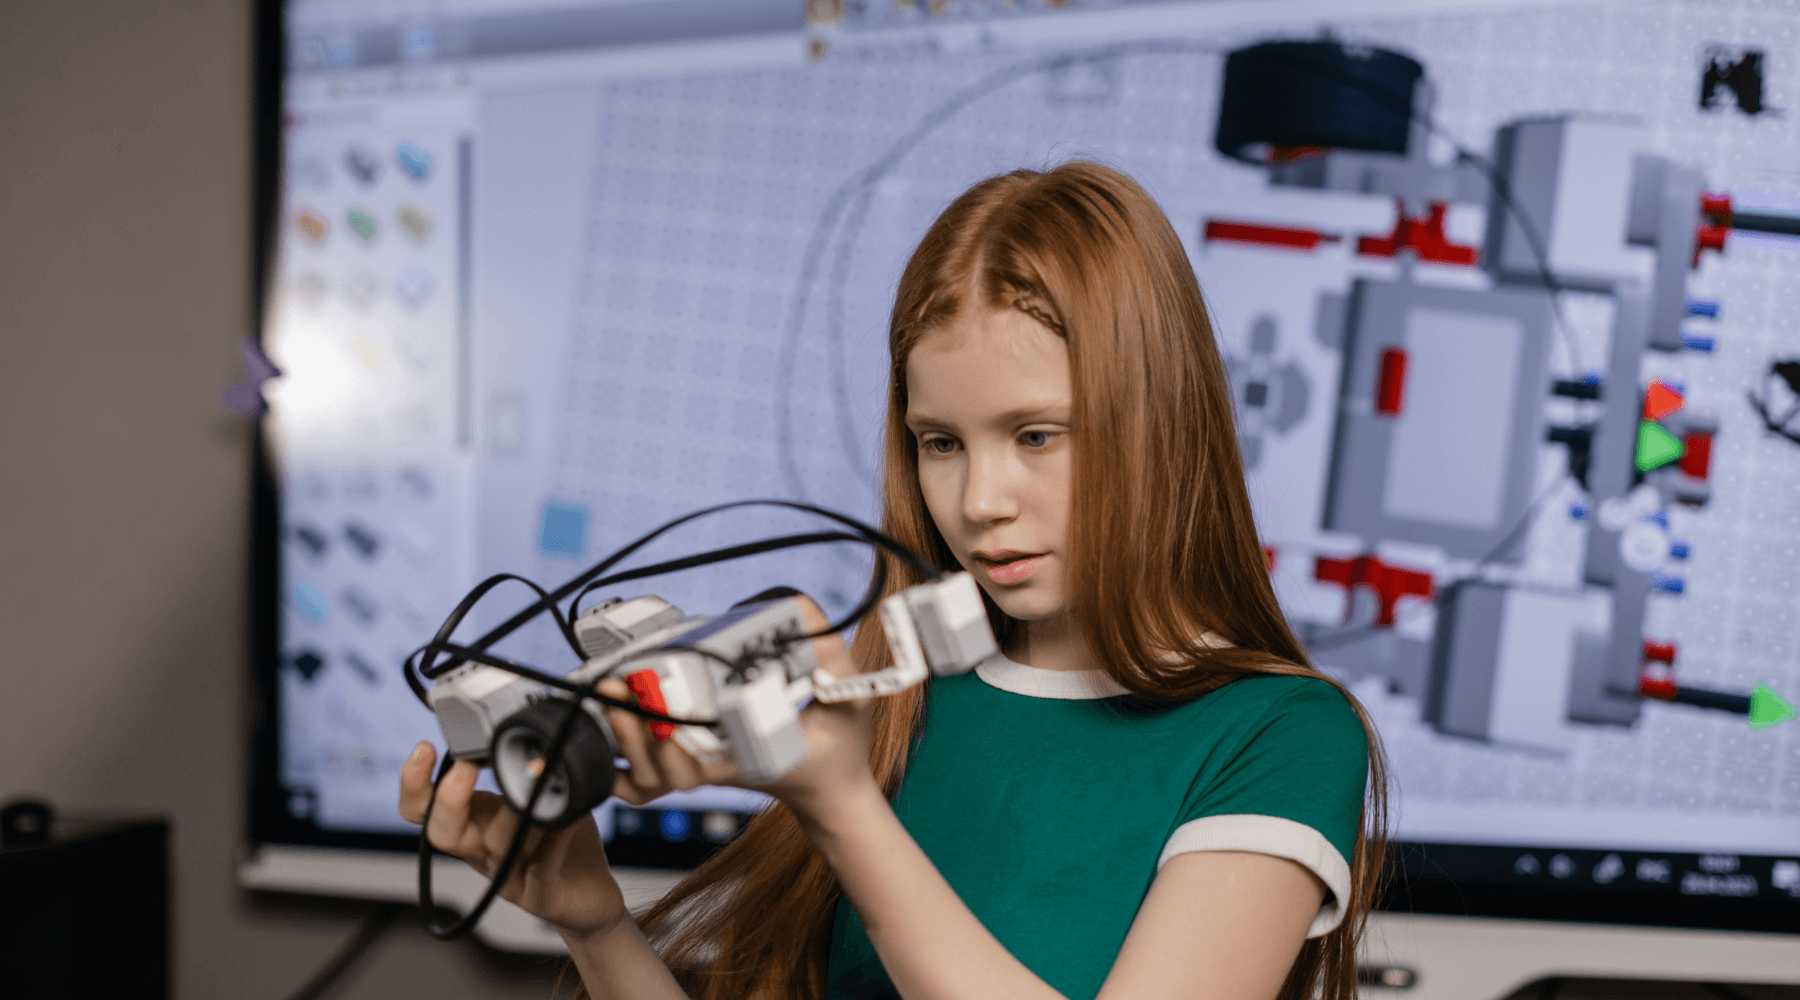 Student in a classroom holding a robotics kit